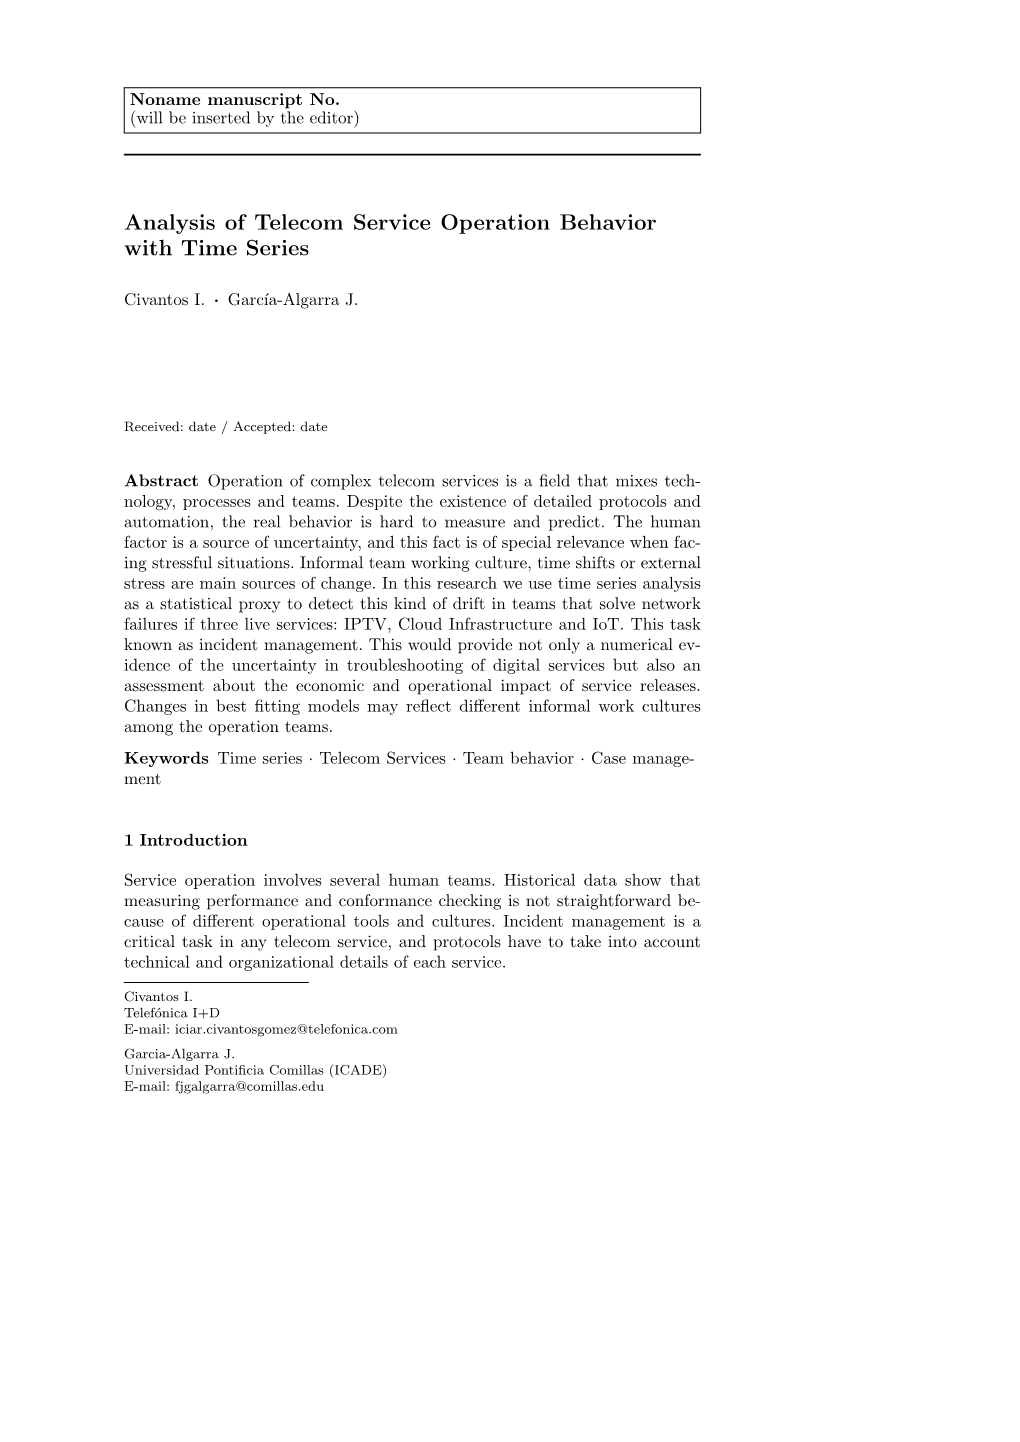 Analysis of Telecom Service Operation Behavior with Time Series